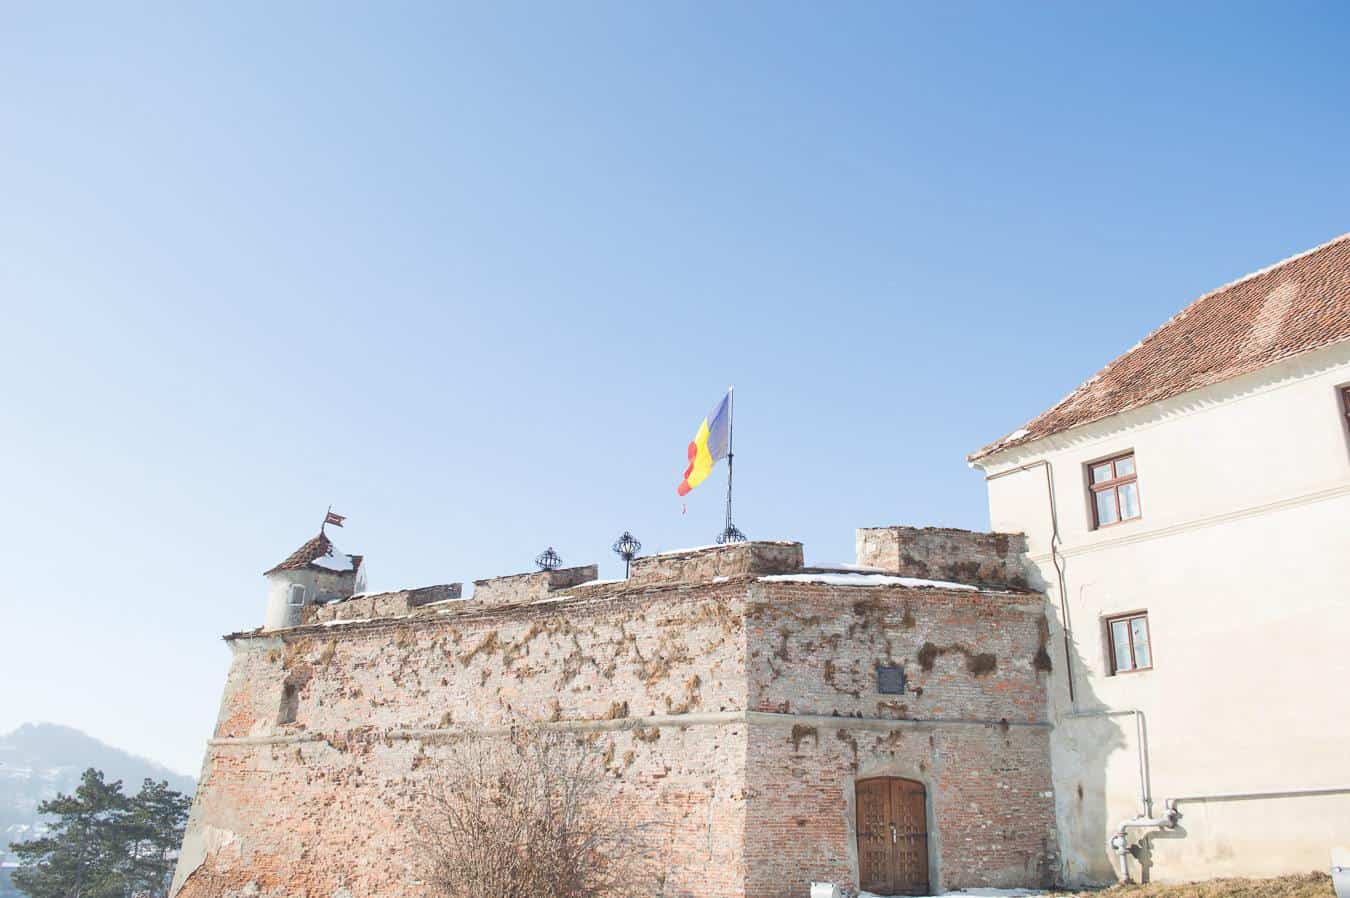 A flag waves in the wind attached to a fort.